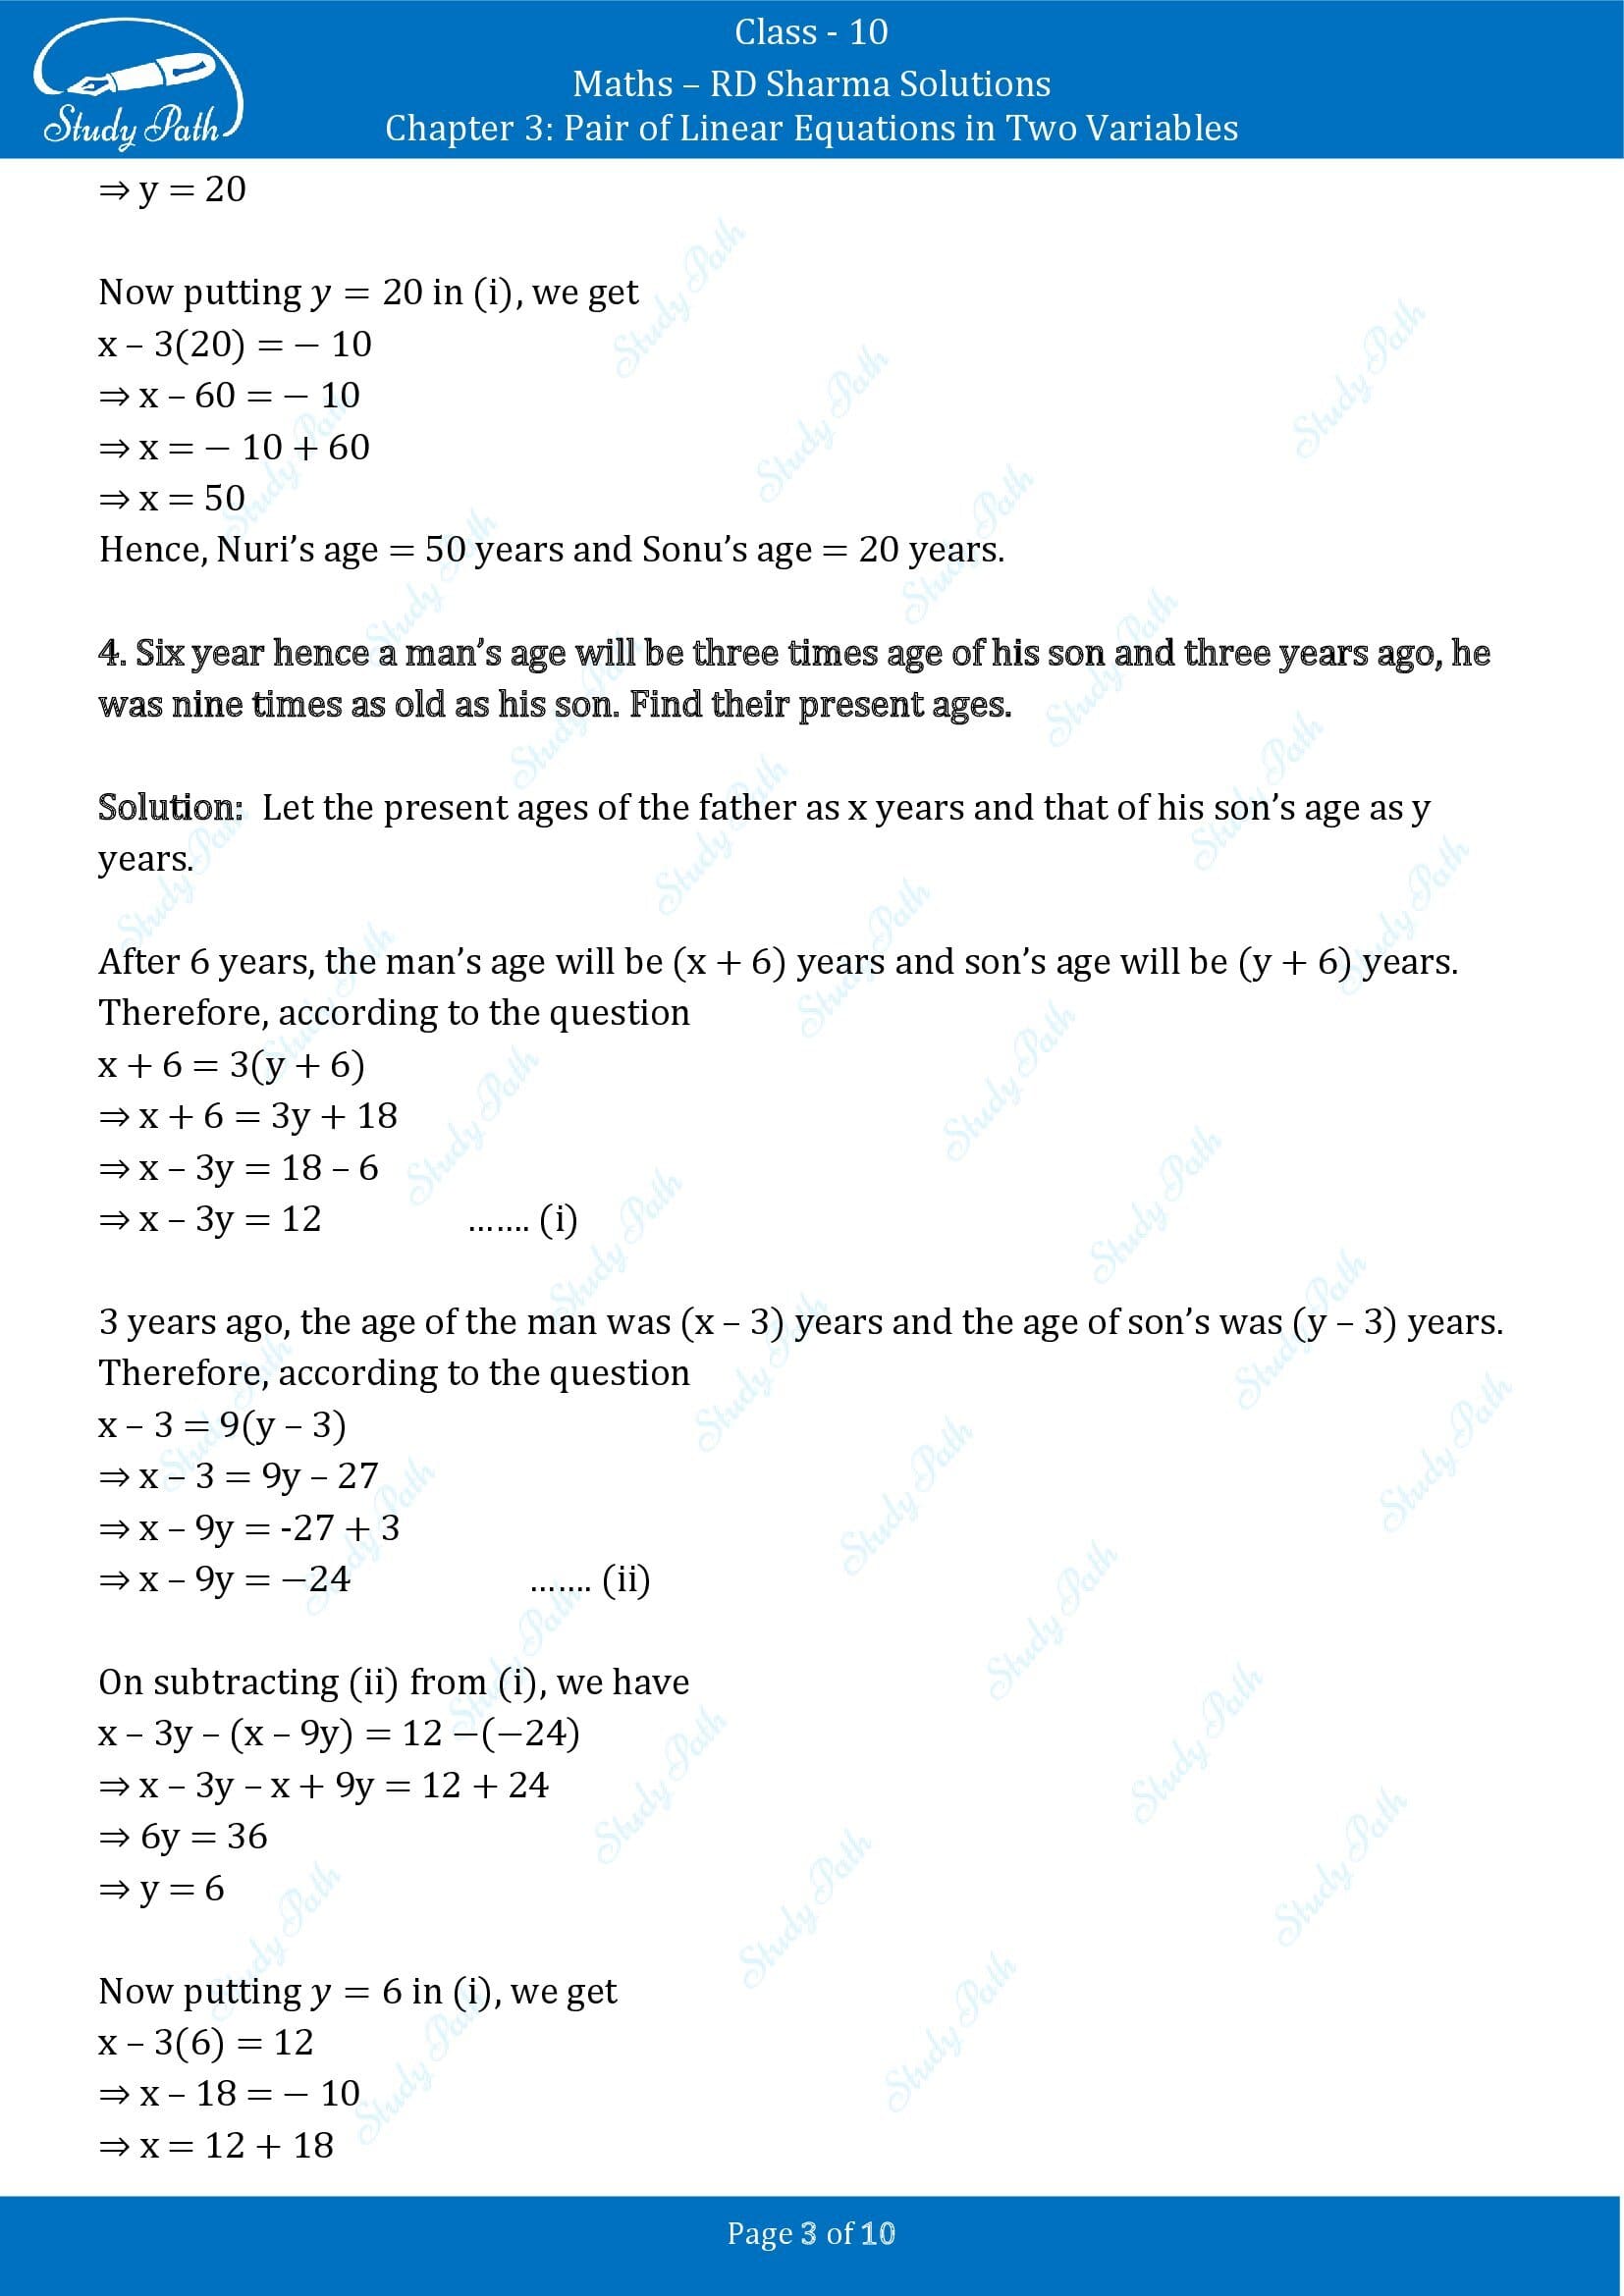 RD Sharma Solutions Class 10 Chapter 3 Pair of Linear Equations in Two Variables Exercise 3.9 00003